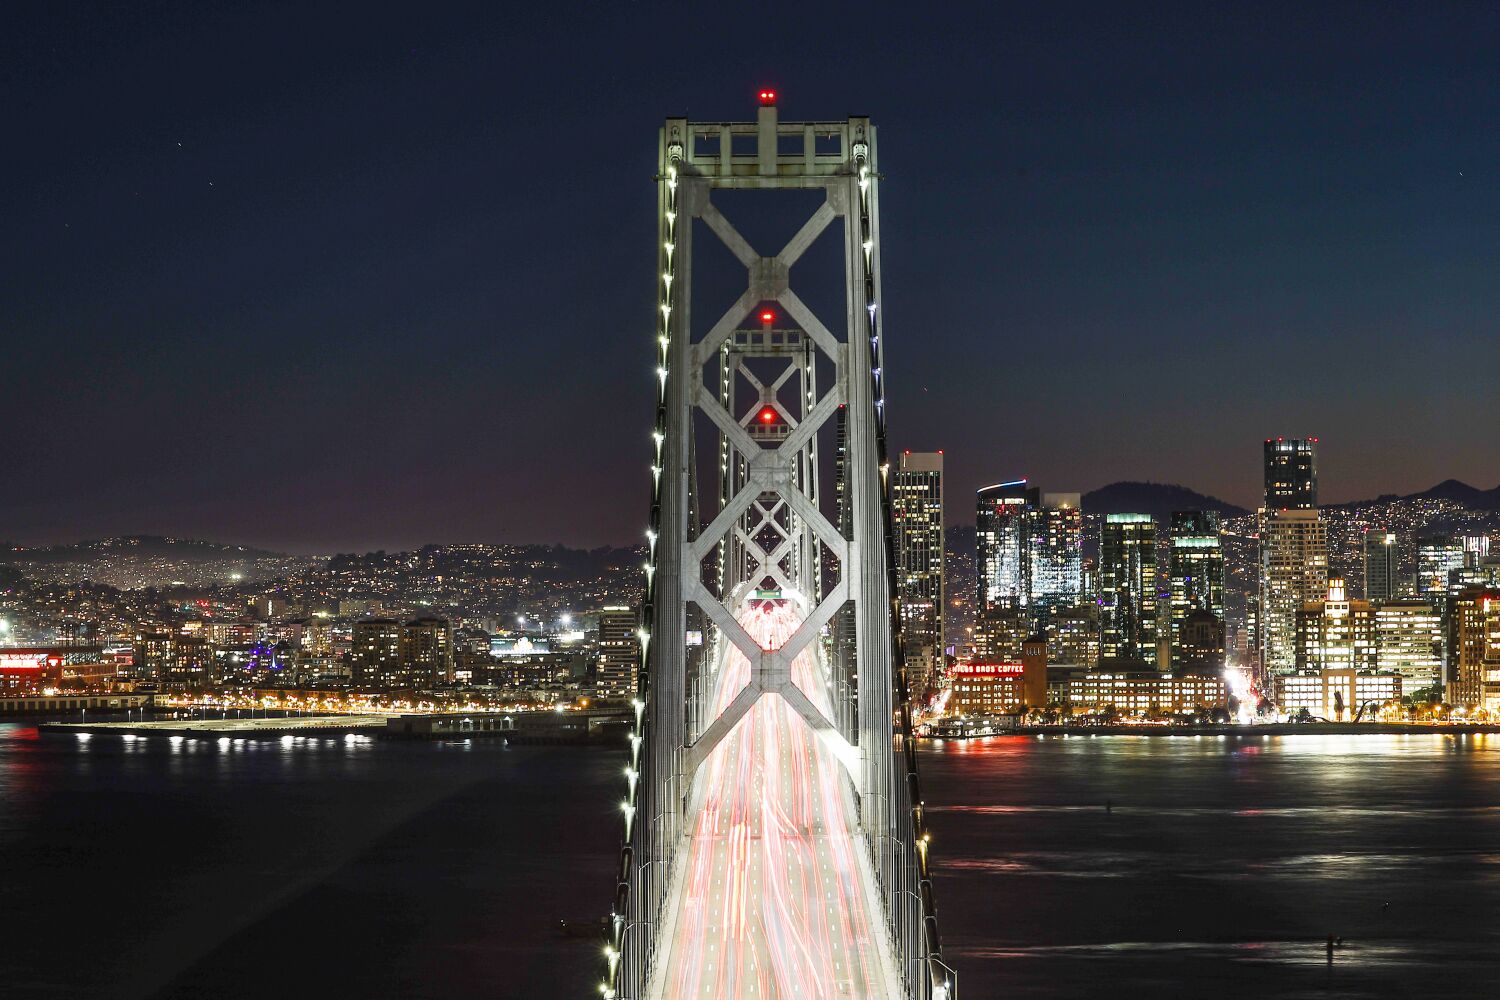 The Bay Bridge lights are going dark Sunday, the fate of the display uncertain